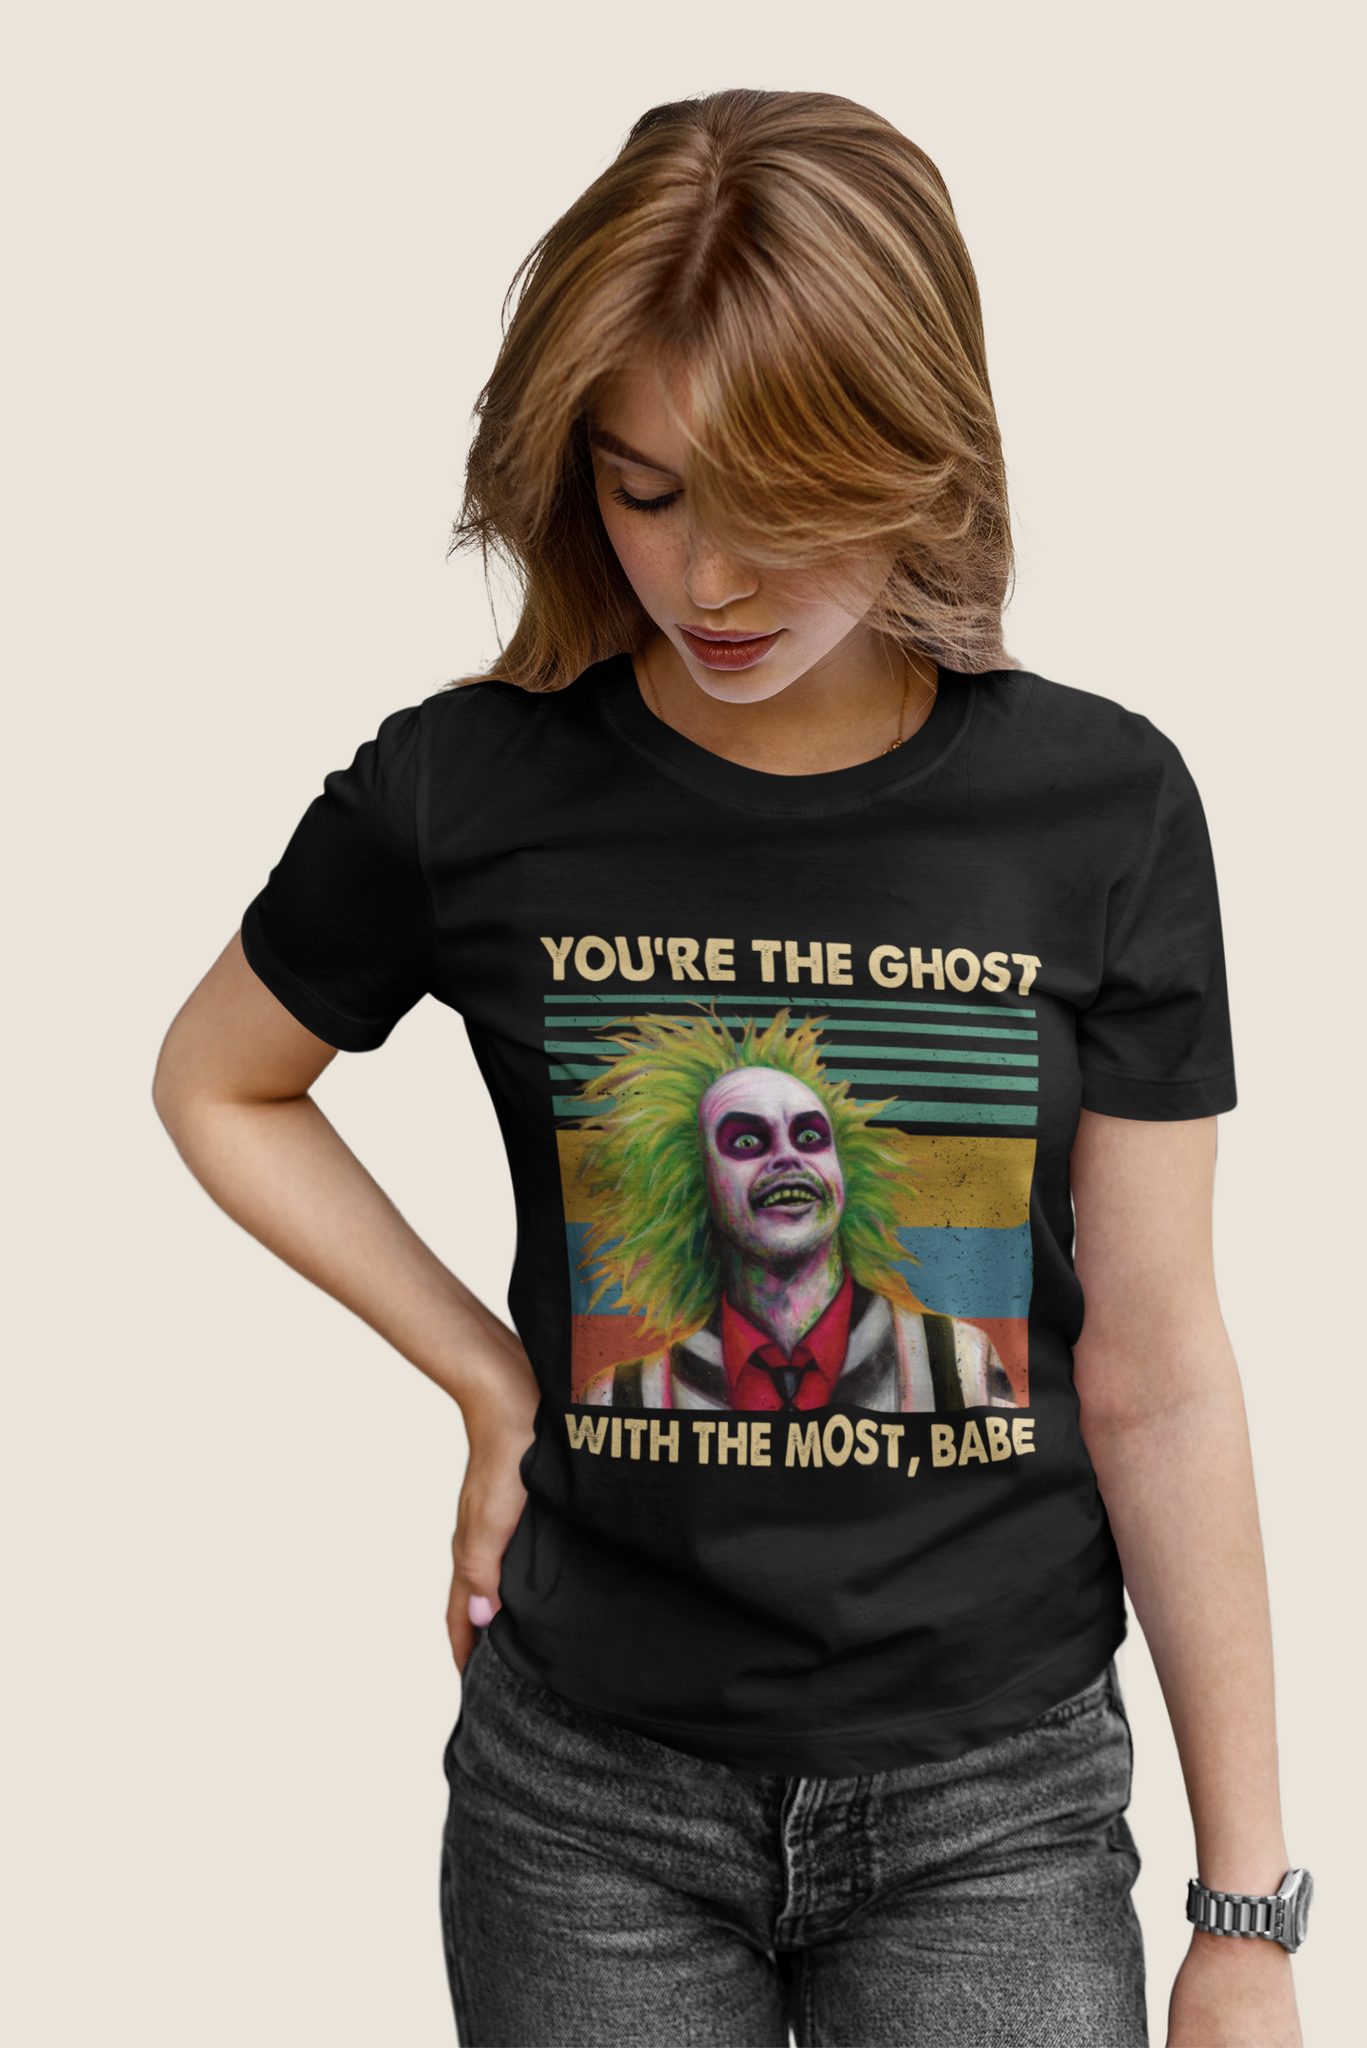 Beetlejuice Vintage T Shirt, Youre The Ghost With The Most Babe Tshirt, Halloween Gifts